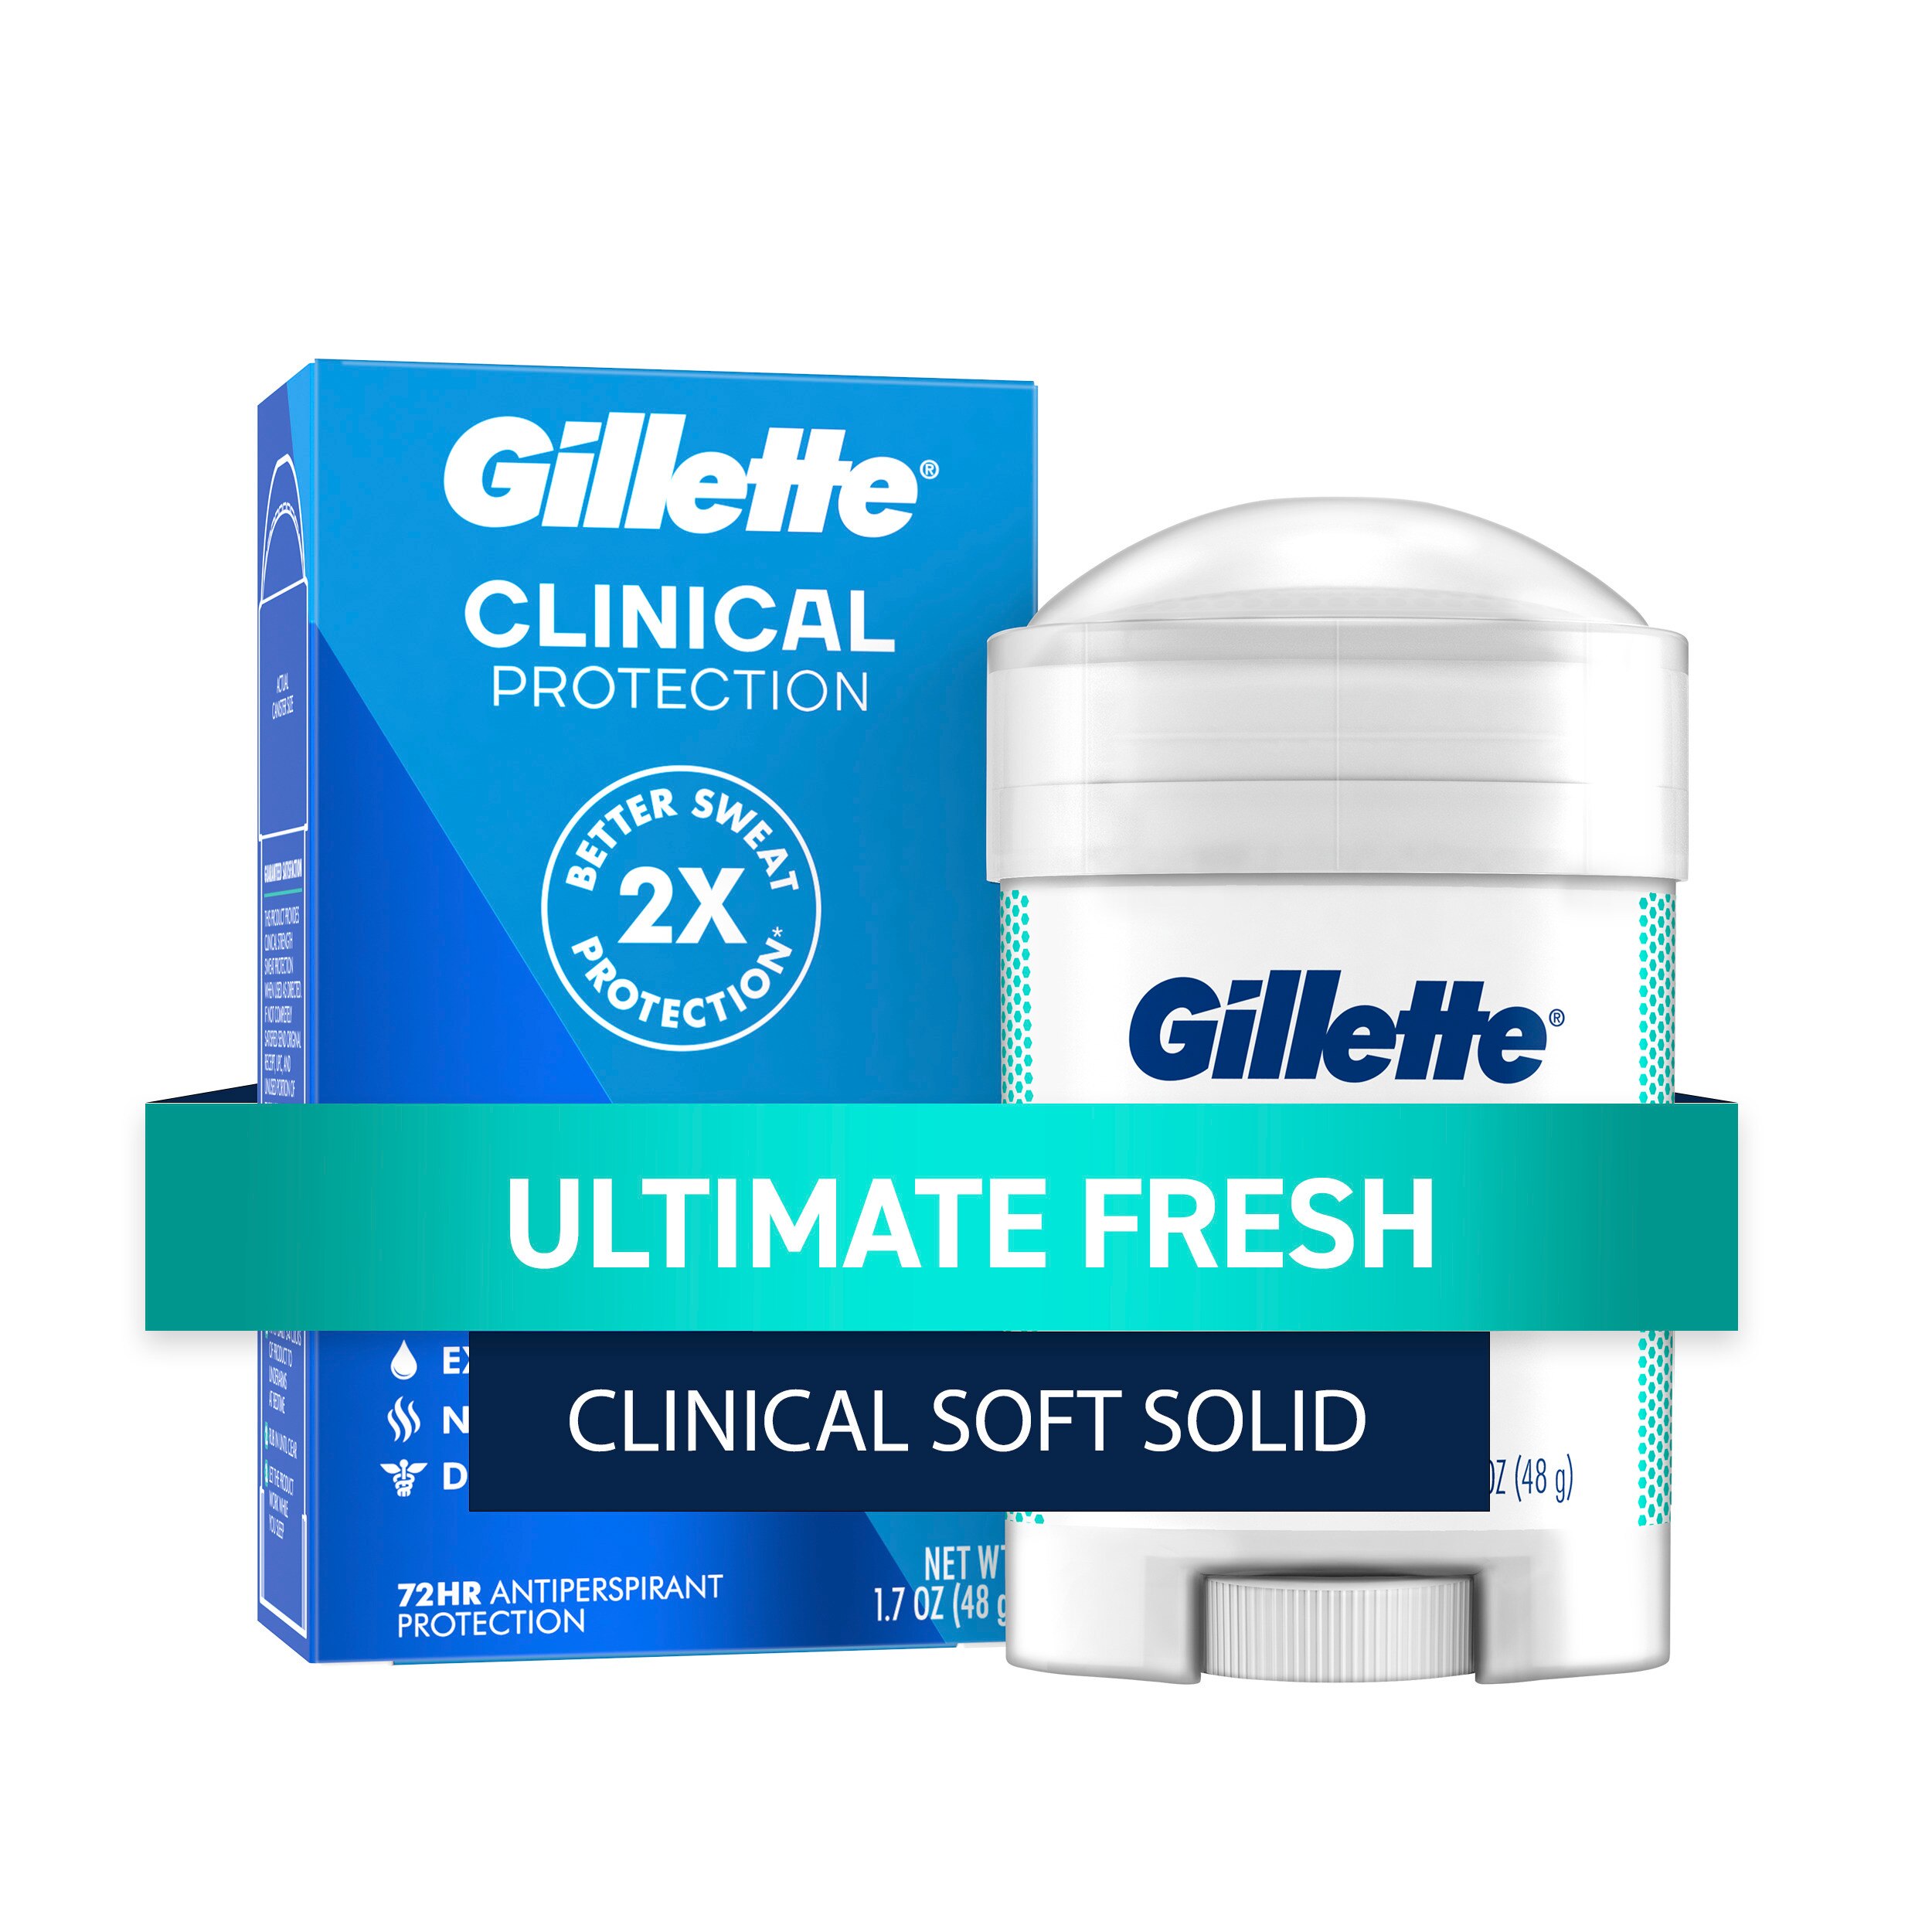 Gillette Clinical Protection 72-Hour Antiperspirant & Deodorant Stick, Ultimate Fresh